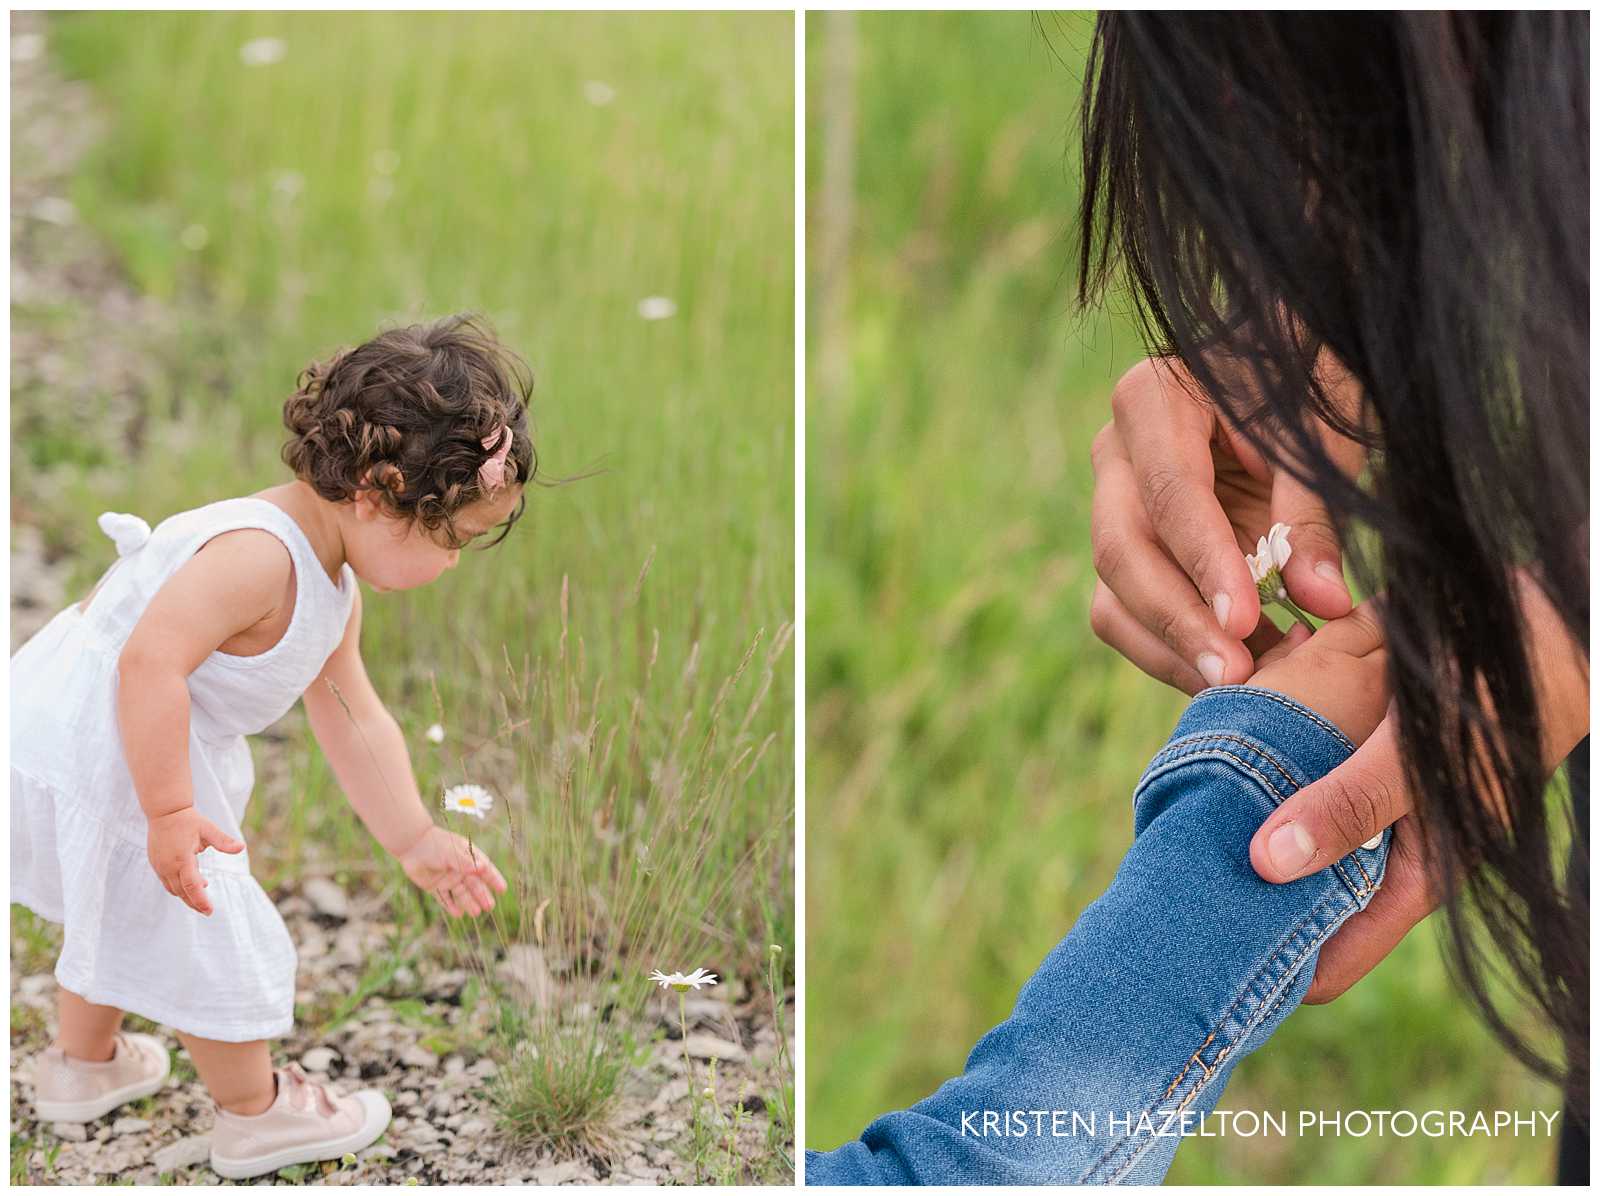 Toddler girl picking daisies for her mother